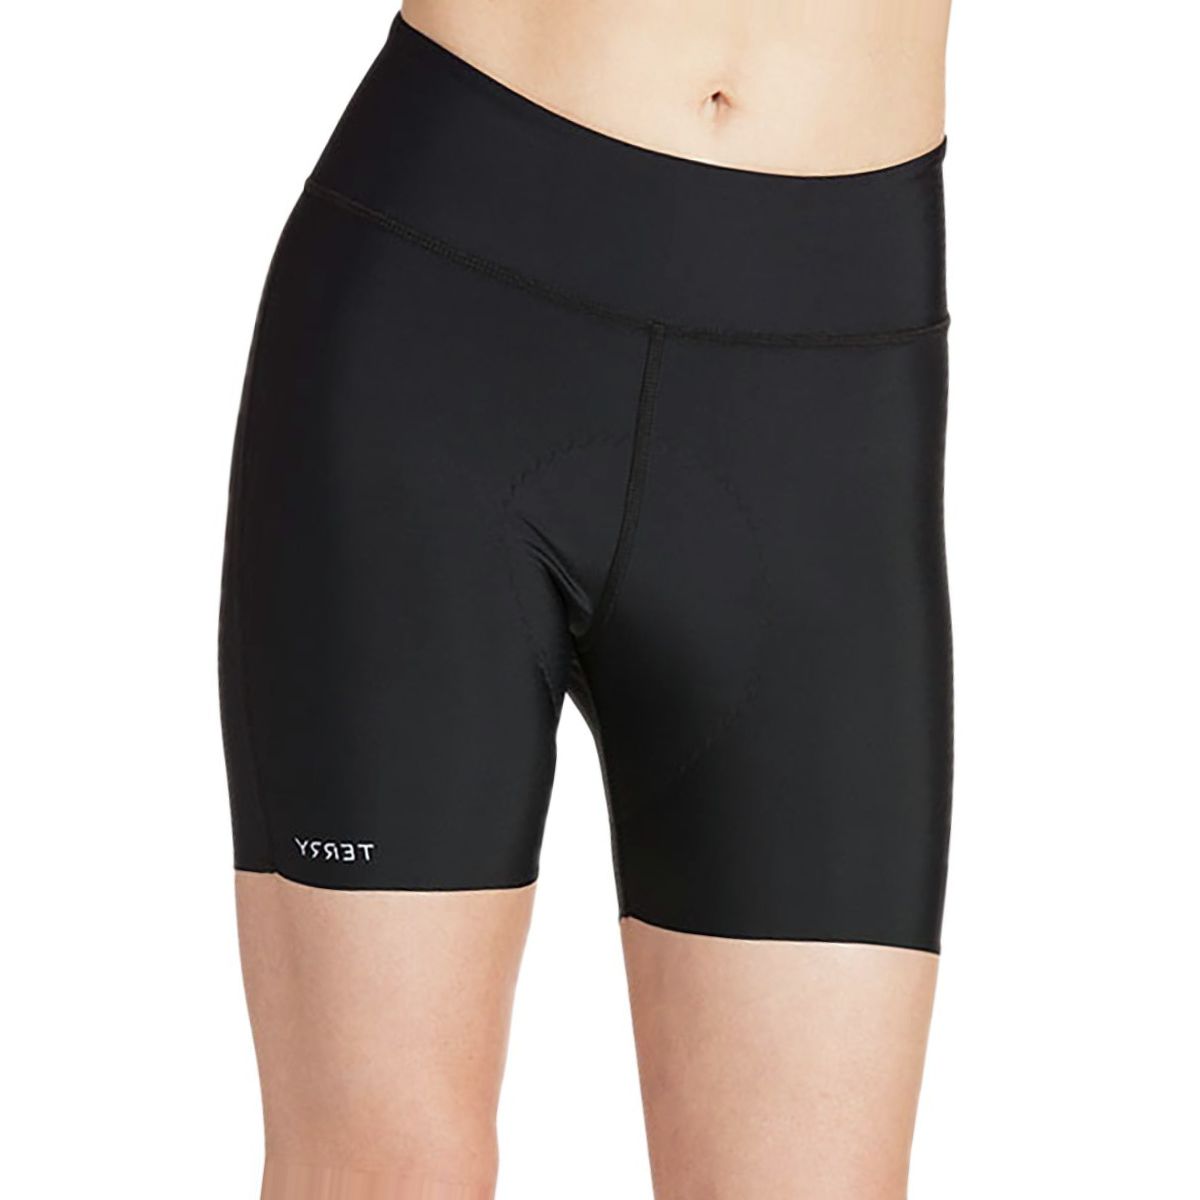 Terry Bicycles Chill 5in Short - Women's